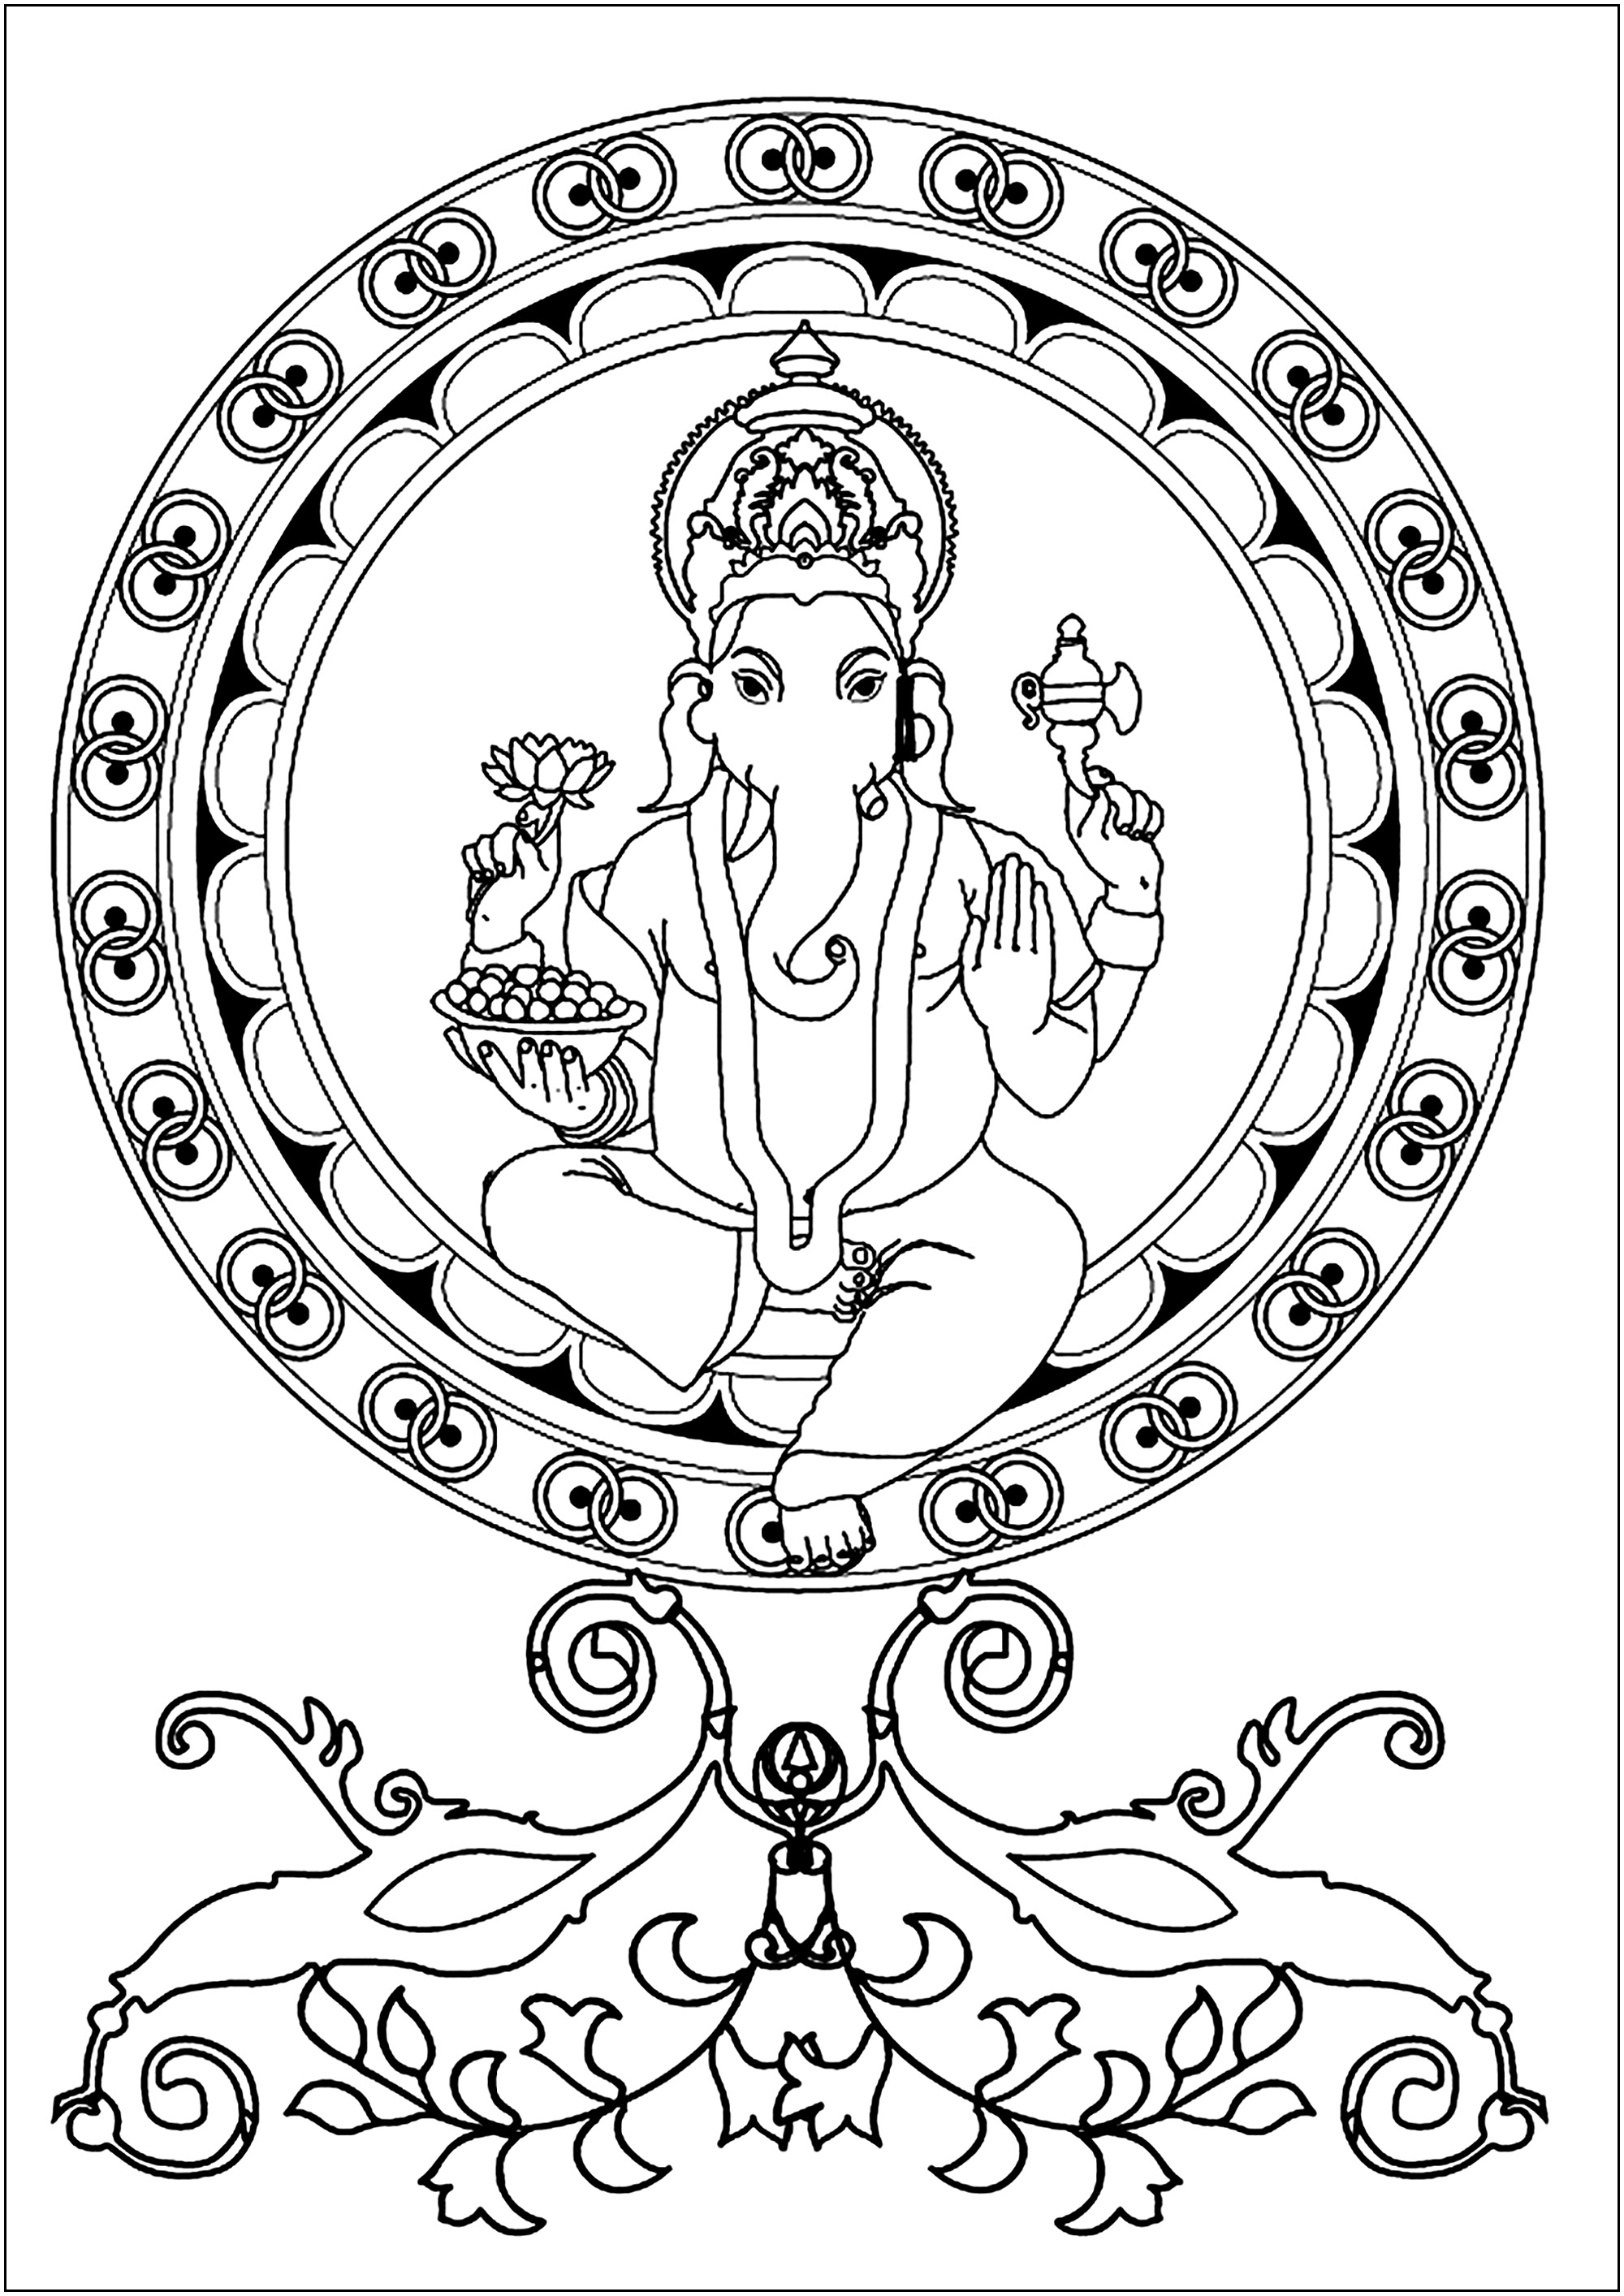 Ganesh in the center of a Mandala. Ganesh is a Hindu deity widely venerated as the god of wisdom, intelligence and prosperity.Depicted with an elephant's head and a human body, he is often honored at the start of rituals and ceremonies to remove obstacles (Vighna) and bring success.